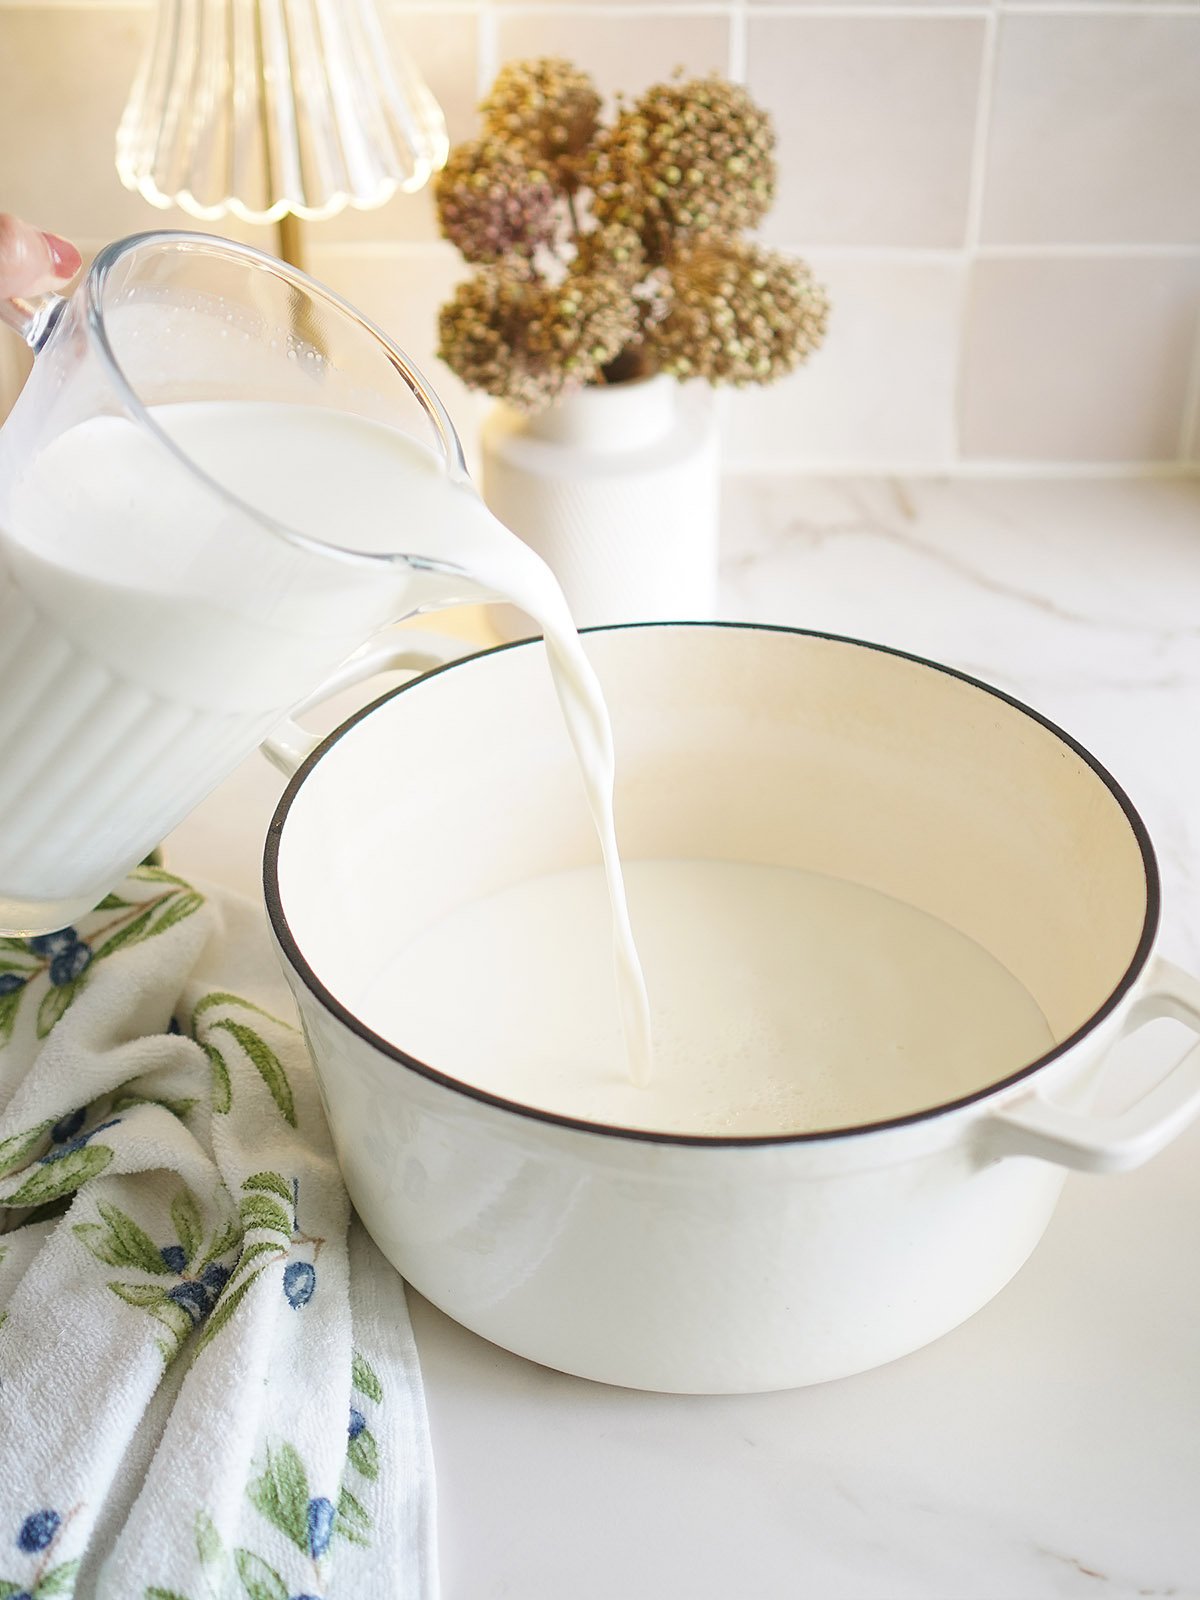 Pouring the milk into a large white sauce pot.